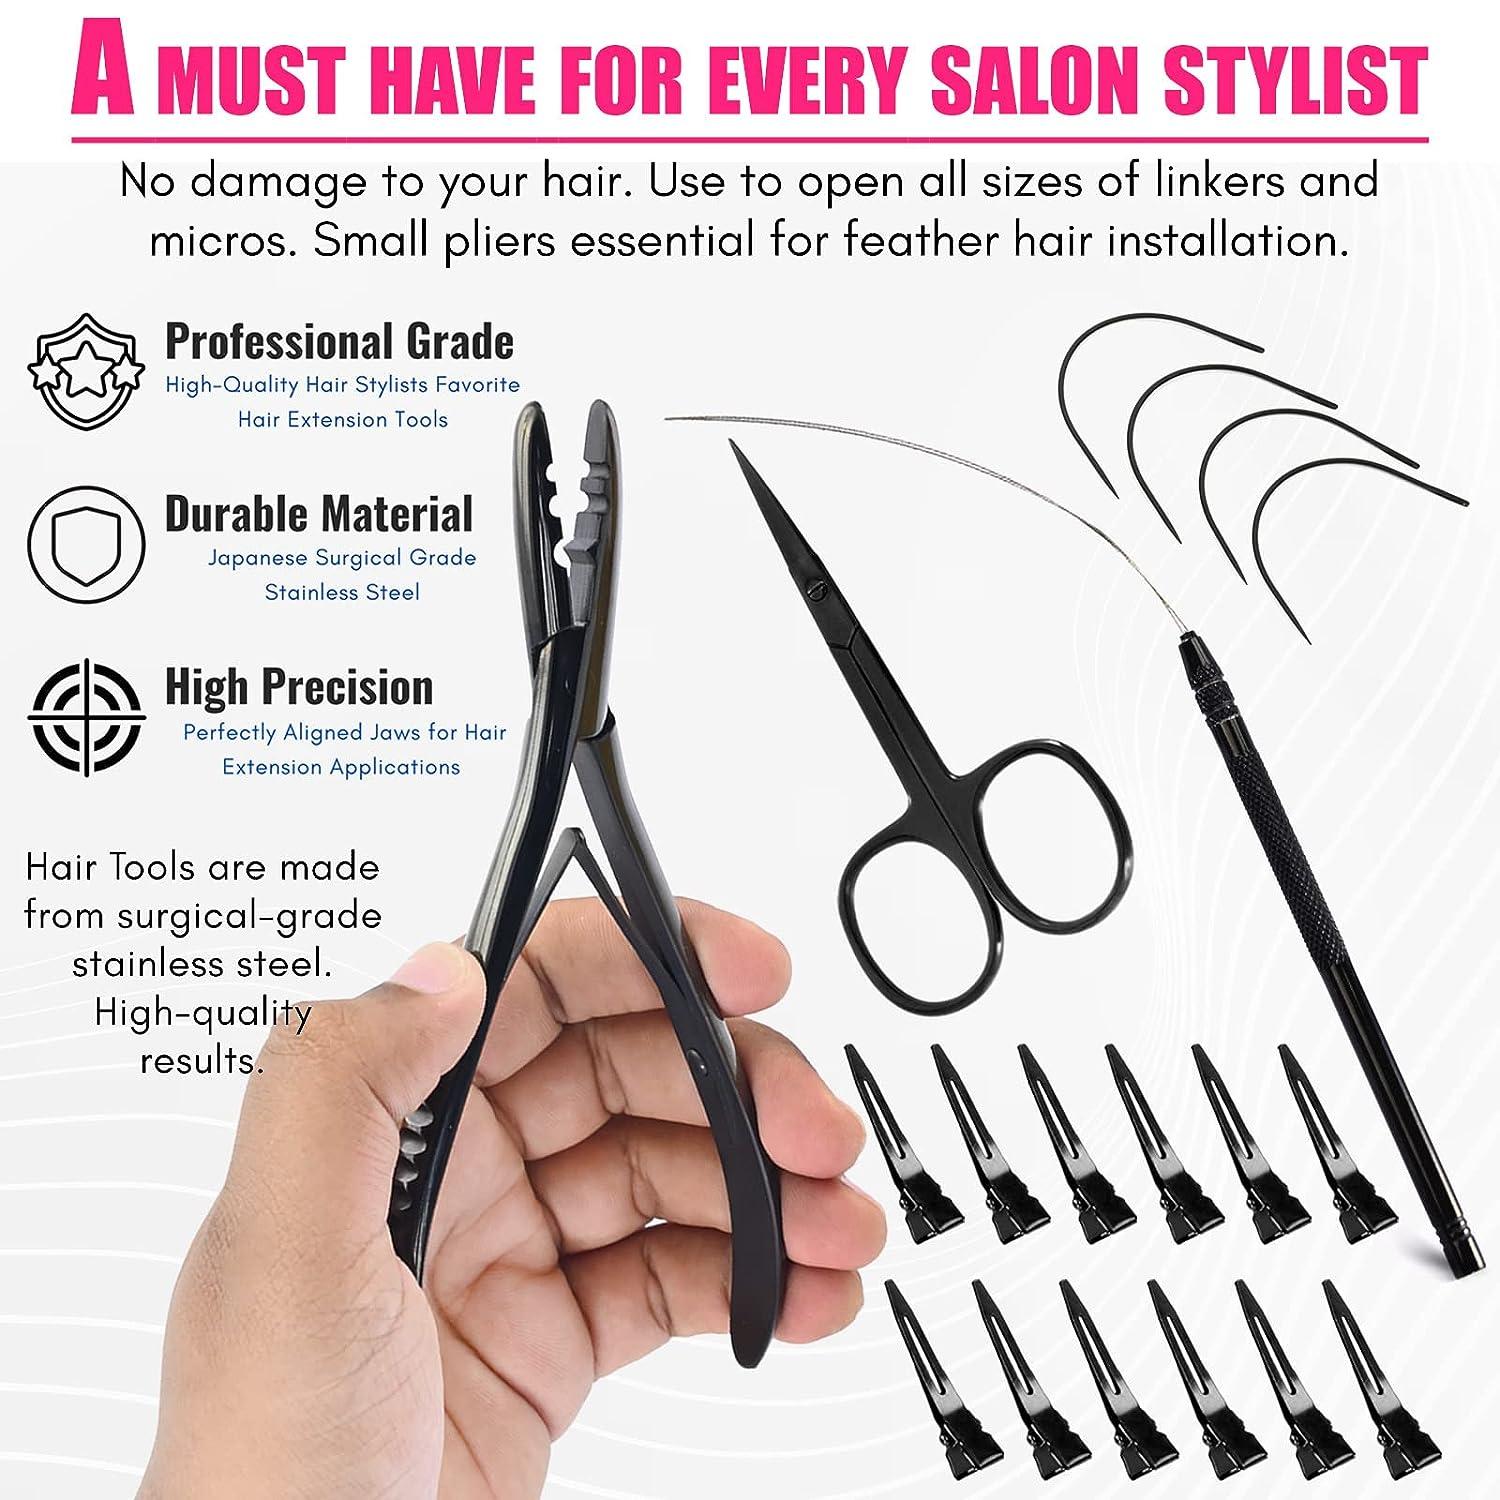 My Hair Tools Hair Extension Tools Kit Includes 2 HoleMicro Beads